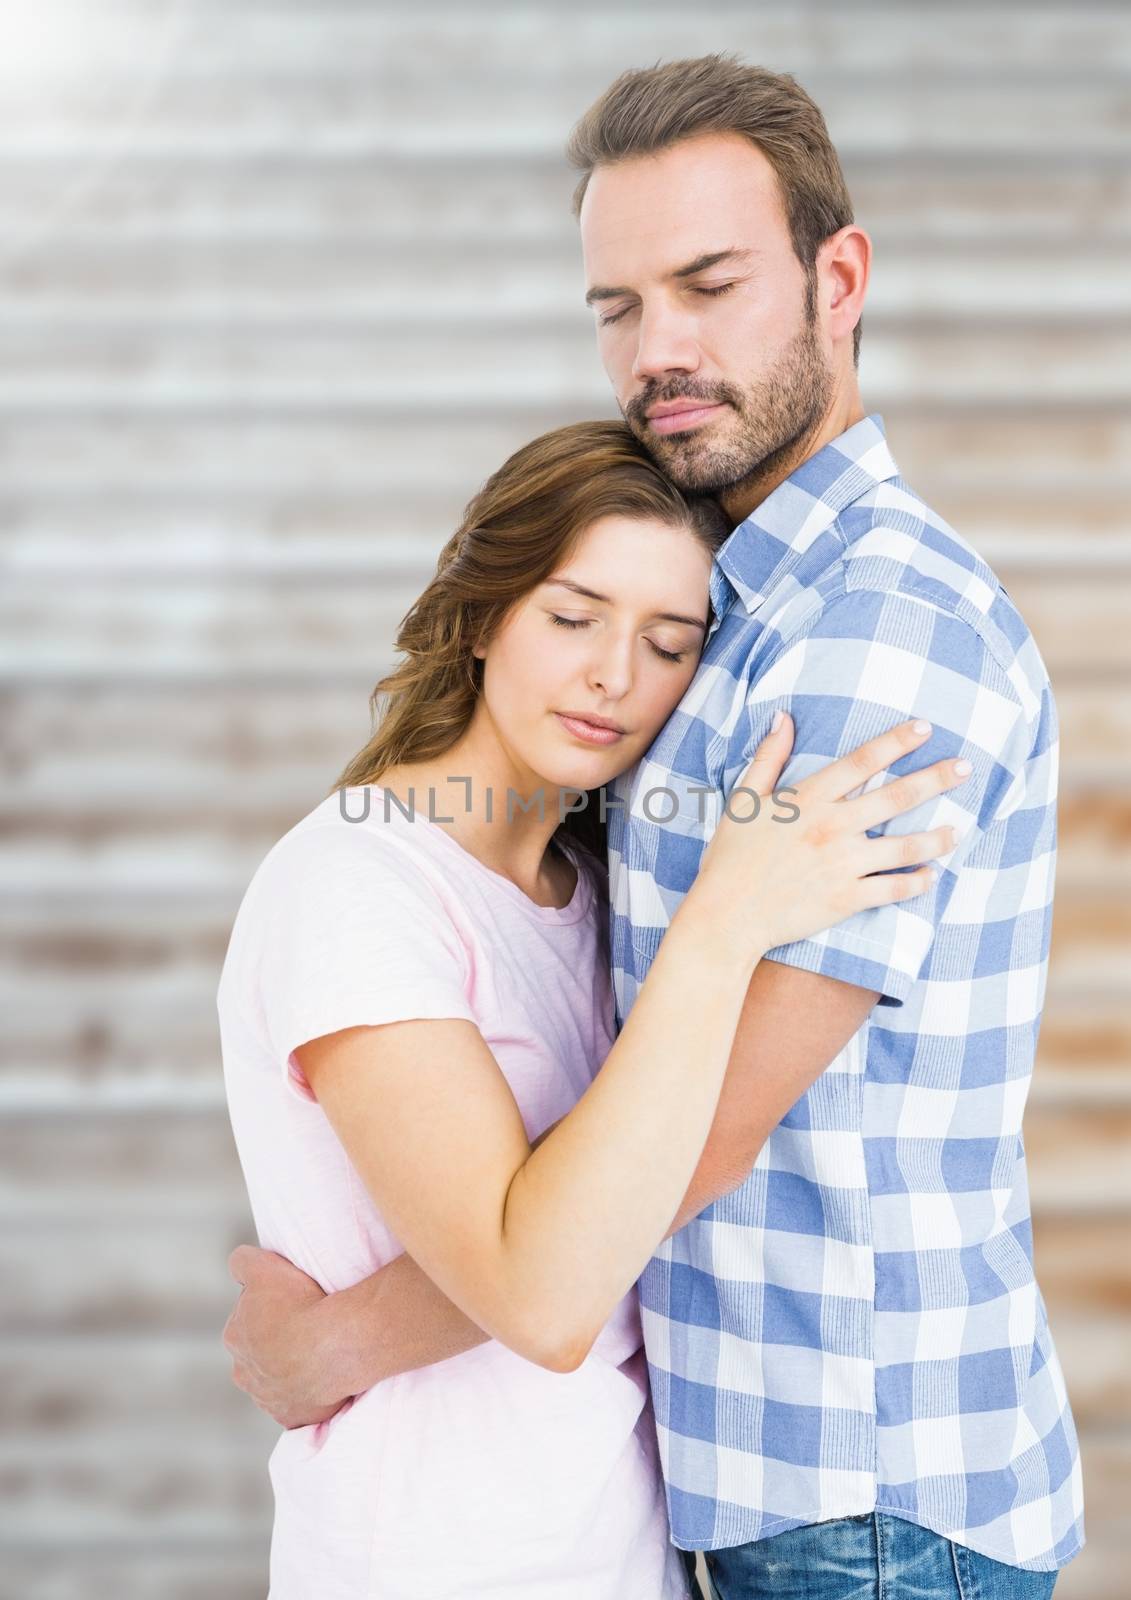 Romantic couple embracing each other against blur background